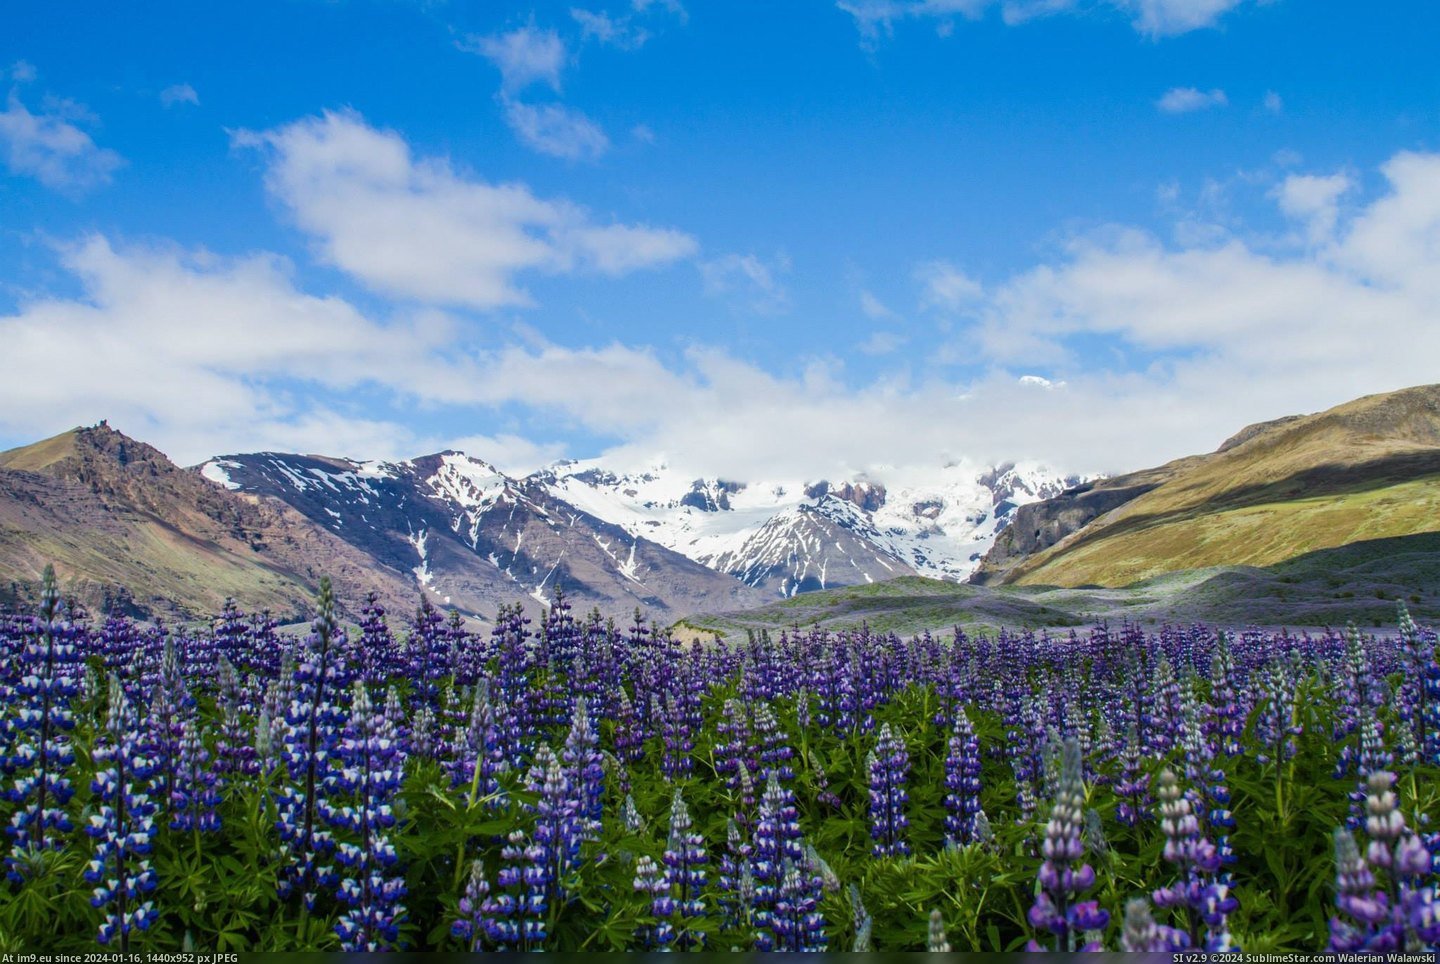 #Mountain #Field #2048x1366 #Lupine #Icelandic [Earthporn] Icelandic Lupine Field W-Mountain Backdrop Outside of Kálfafell  [2048x1366] Pic. (Изображение из альбом My r/EARTHPORN favs))